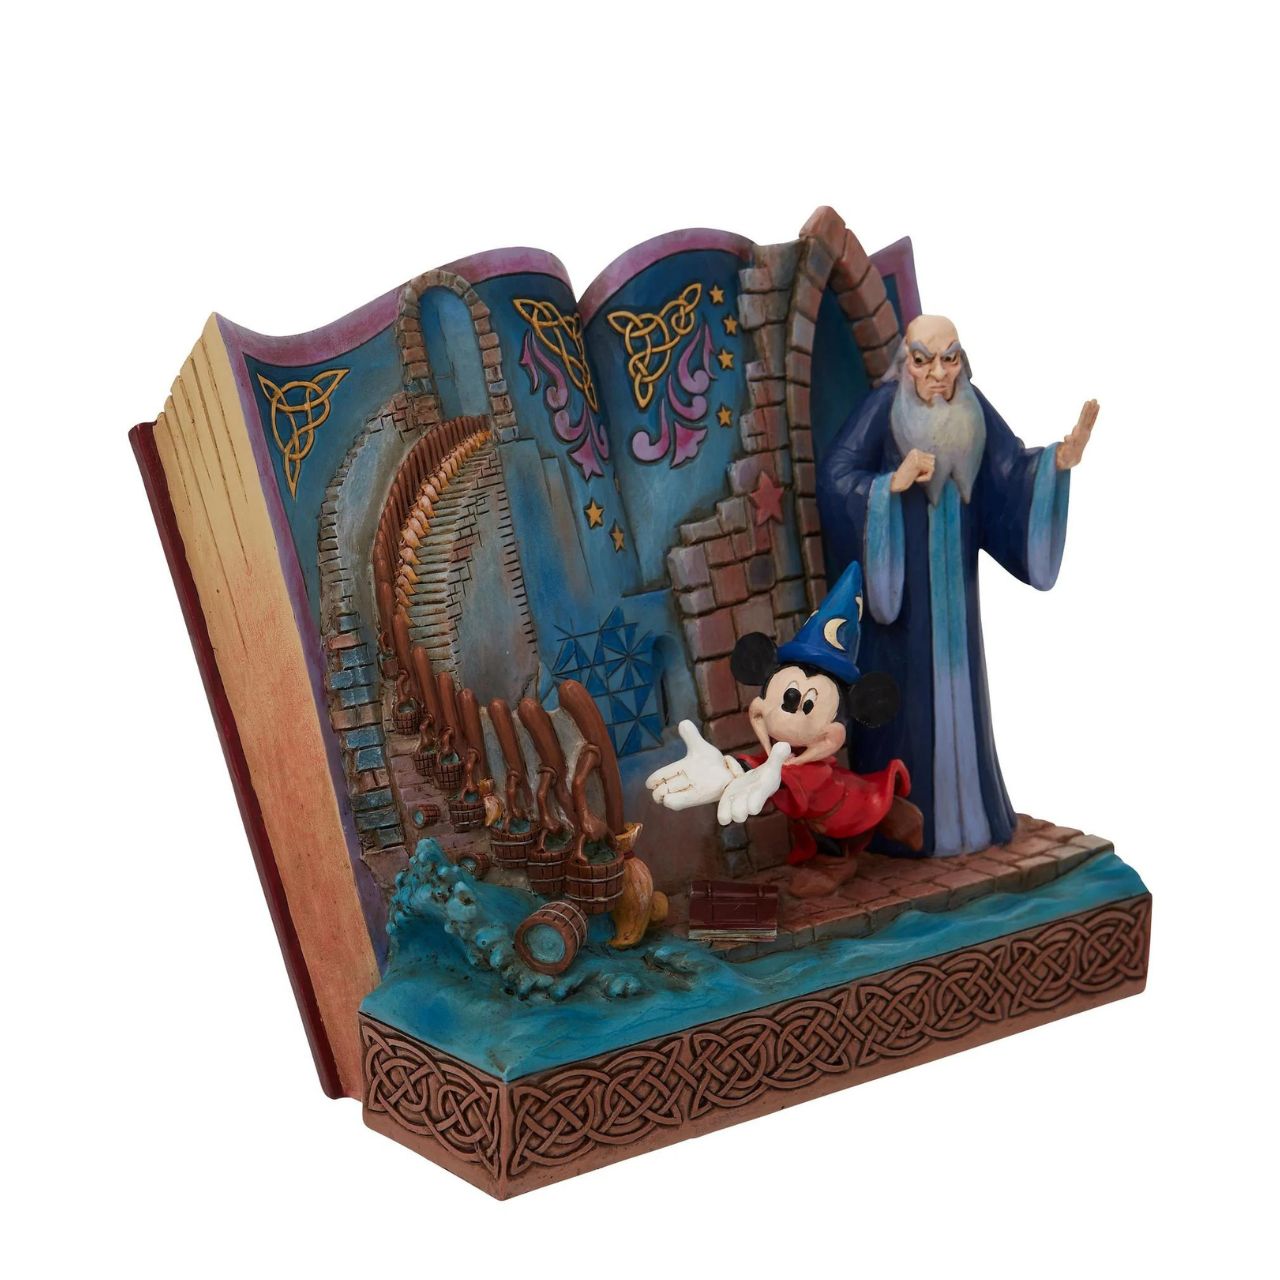 Disney Showcase Sorcerer Mickey Storybook Figurine  Jim Shore re-imagines Fantasia in fantastic fashion in this enchanting statuette by Jim Shore. Mickey Mouse plays sorcerer as he enchants broomsticks to do chores while mentor Yen Sid watches. The complete scene rests inside the pages of a storybook.